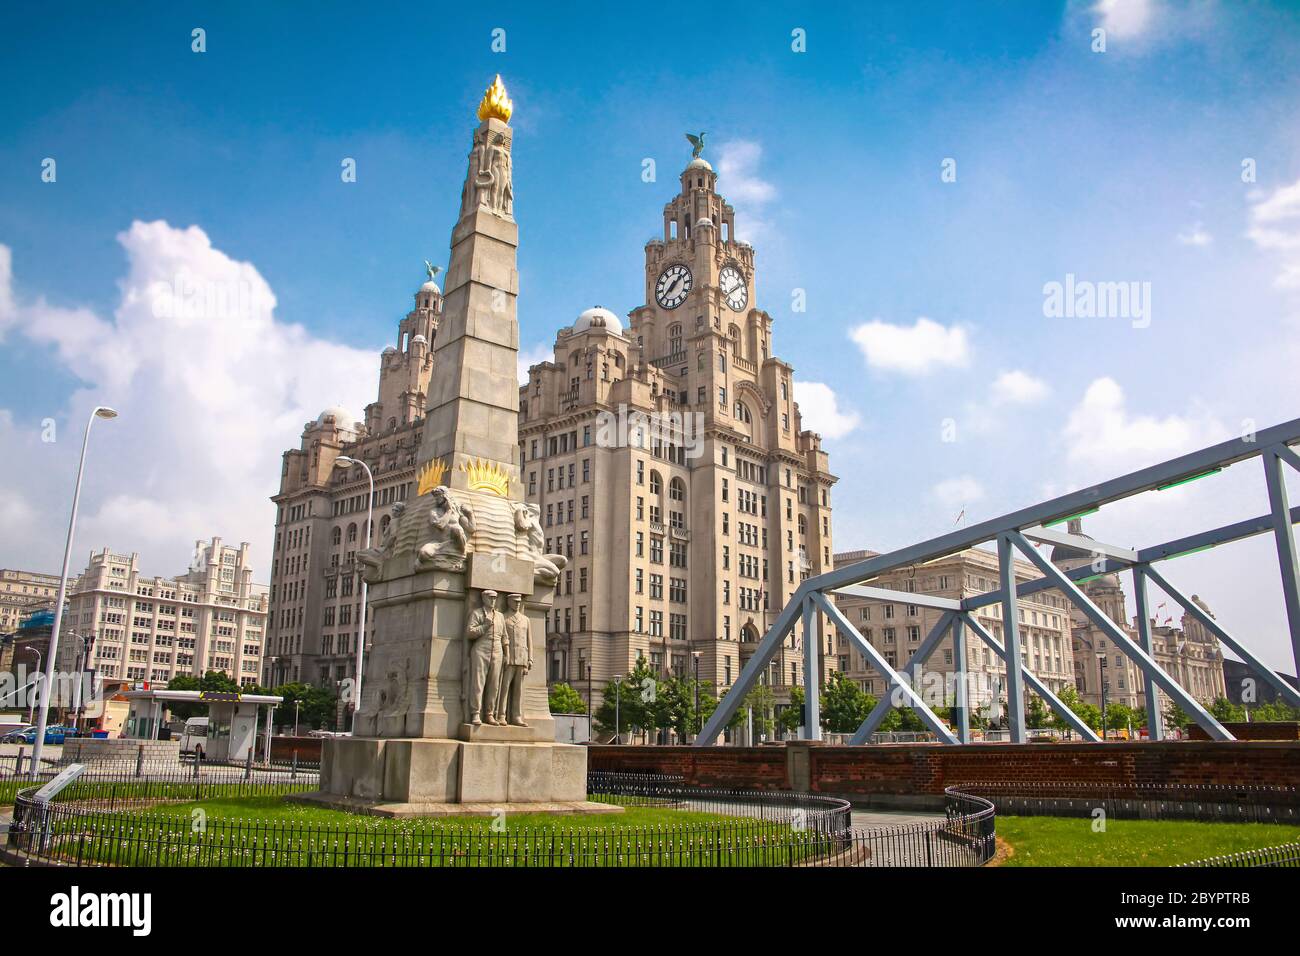 Liverpool am Wasser mit dem Memorial to the Engine Room Heroes of the Titanic & The Royal Liver Building, England, Großbritannien. Stockfoto